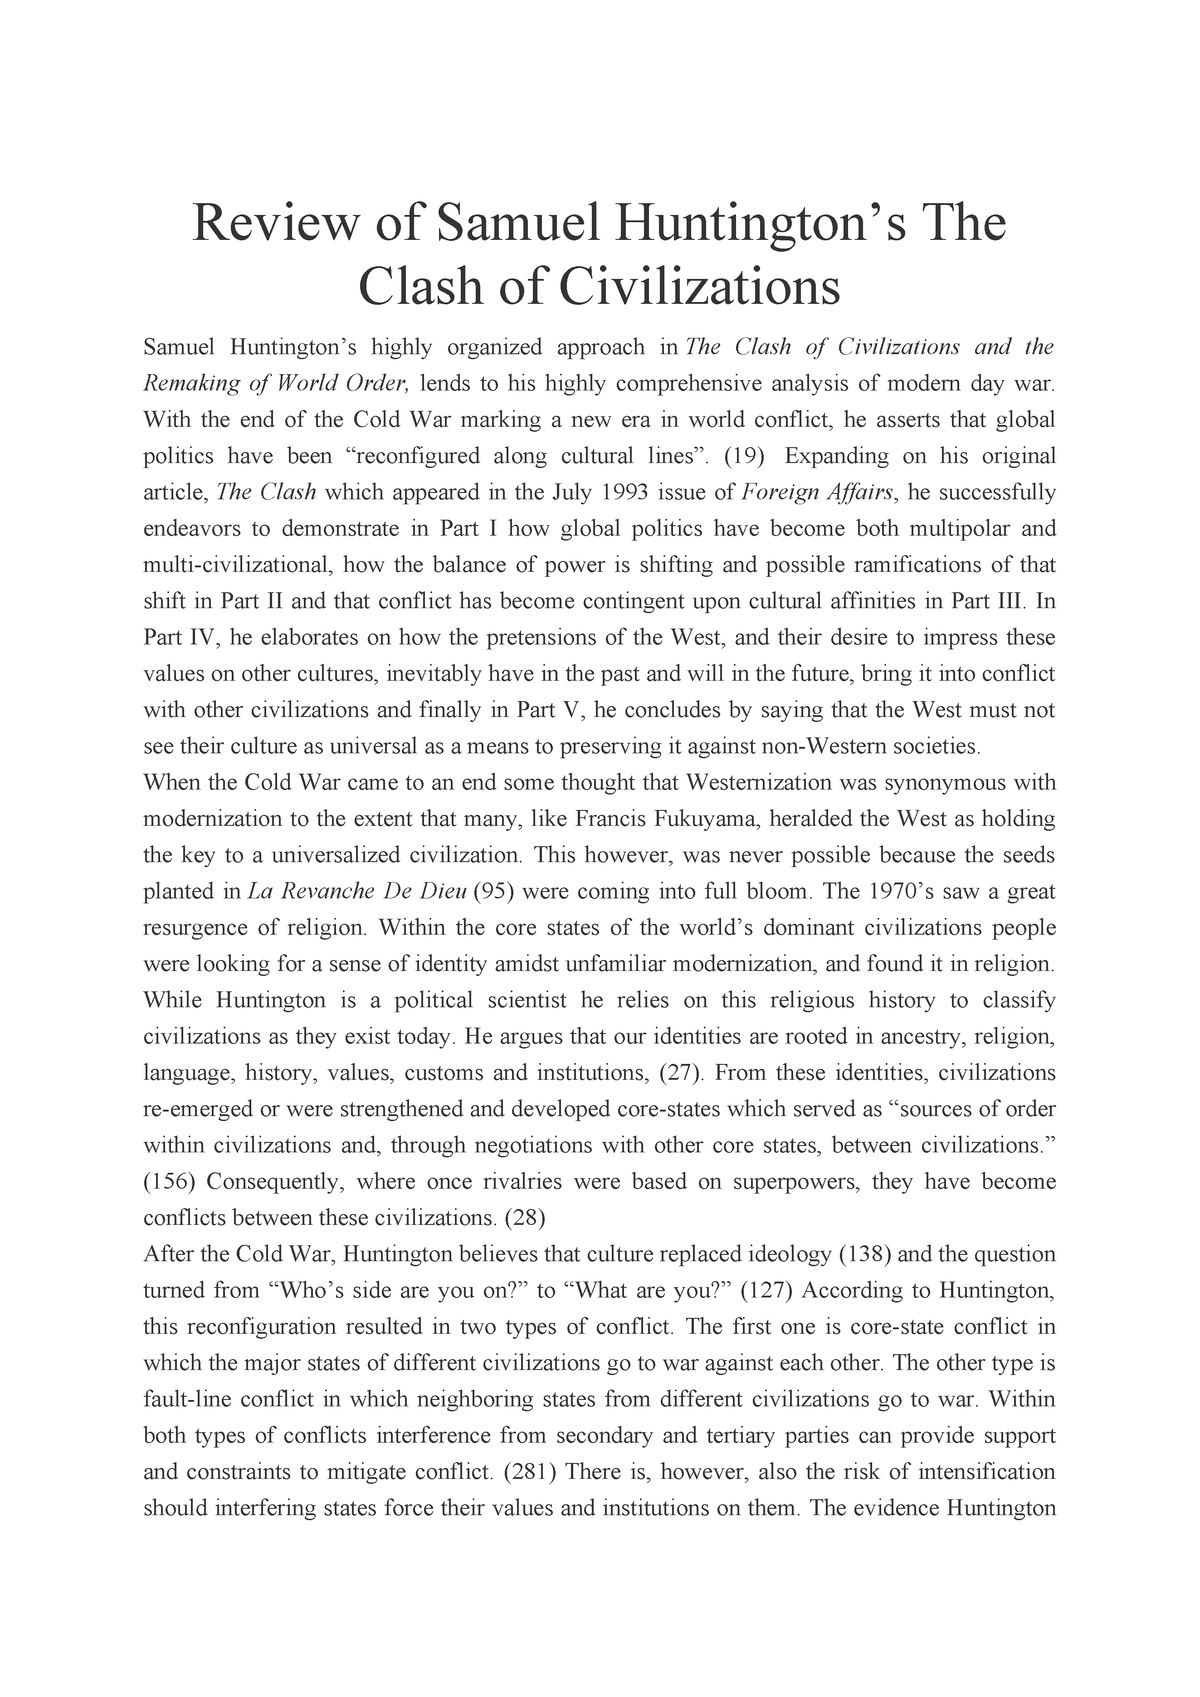 clash of civilizations thesis summary